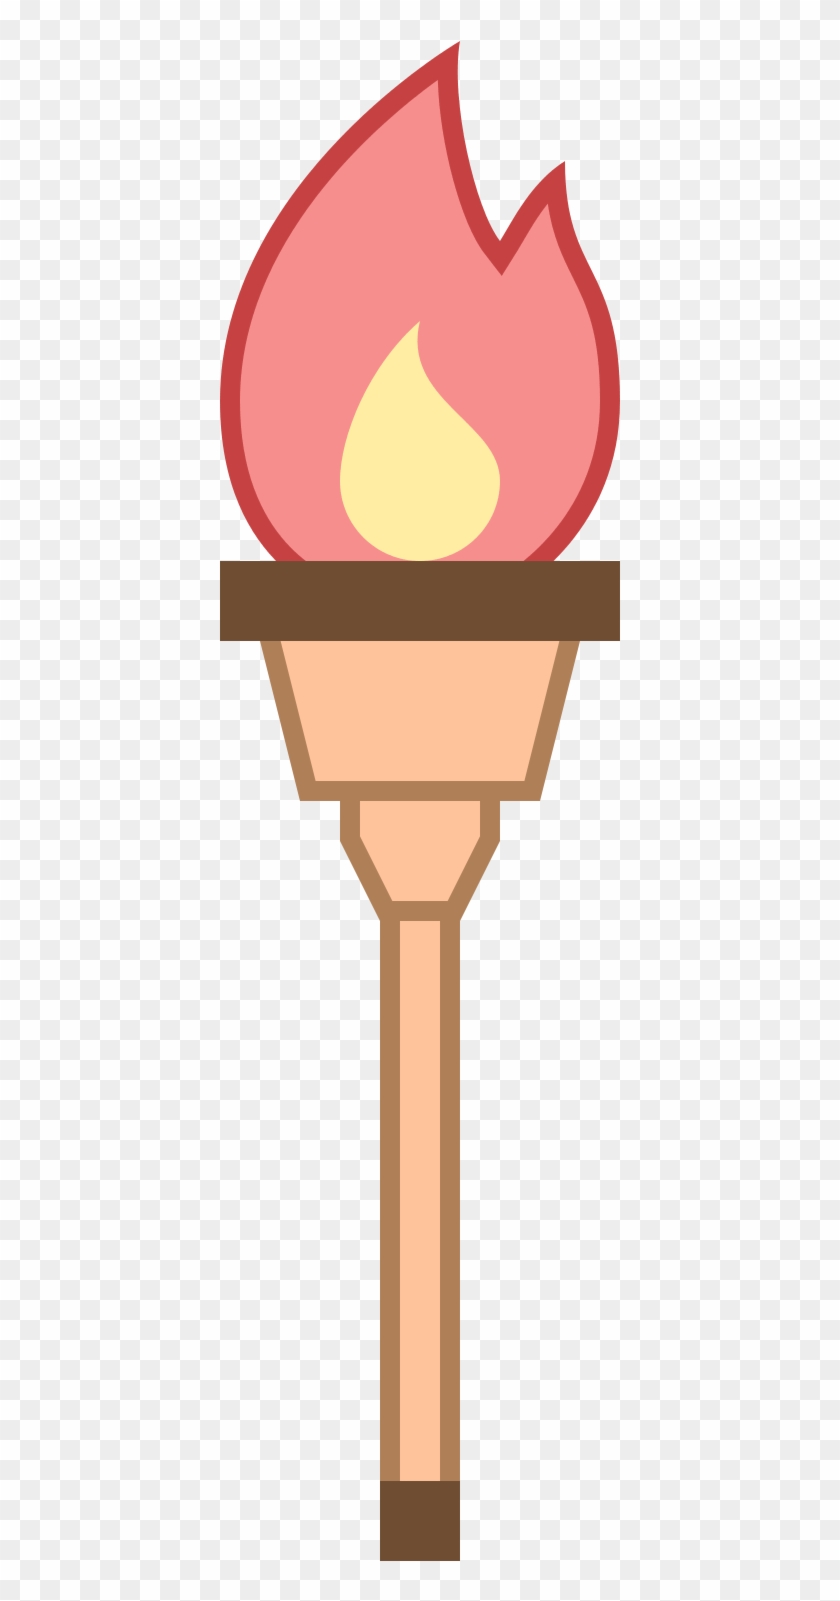 Torch Clipart Outside Game - Torch Clipart Outside Game #1524183